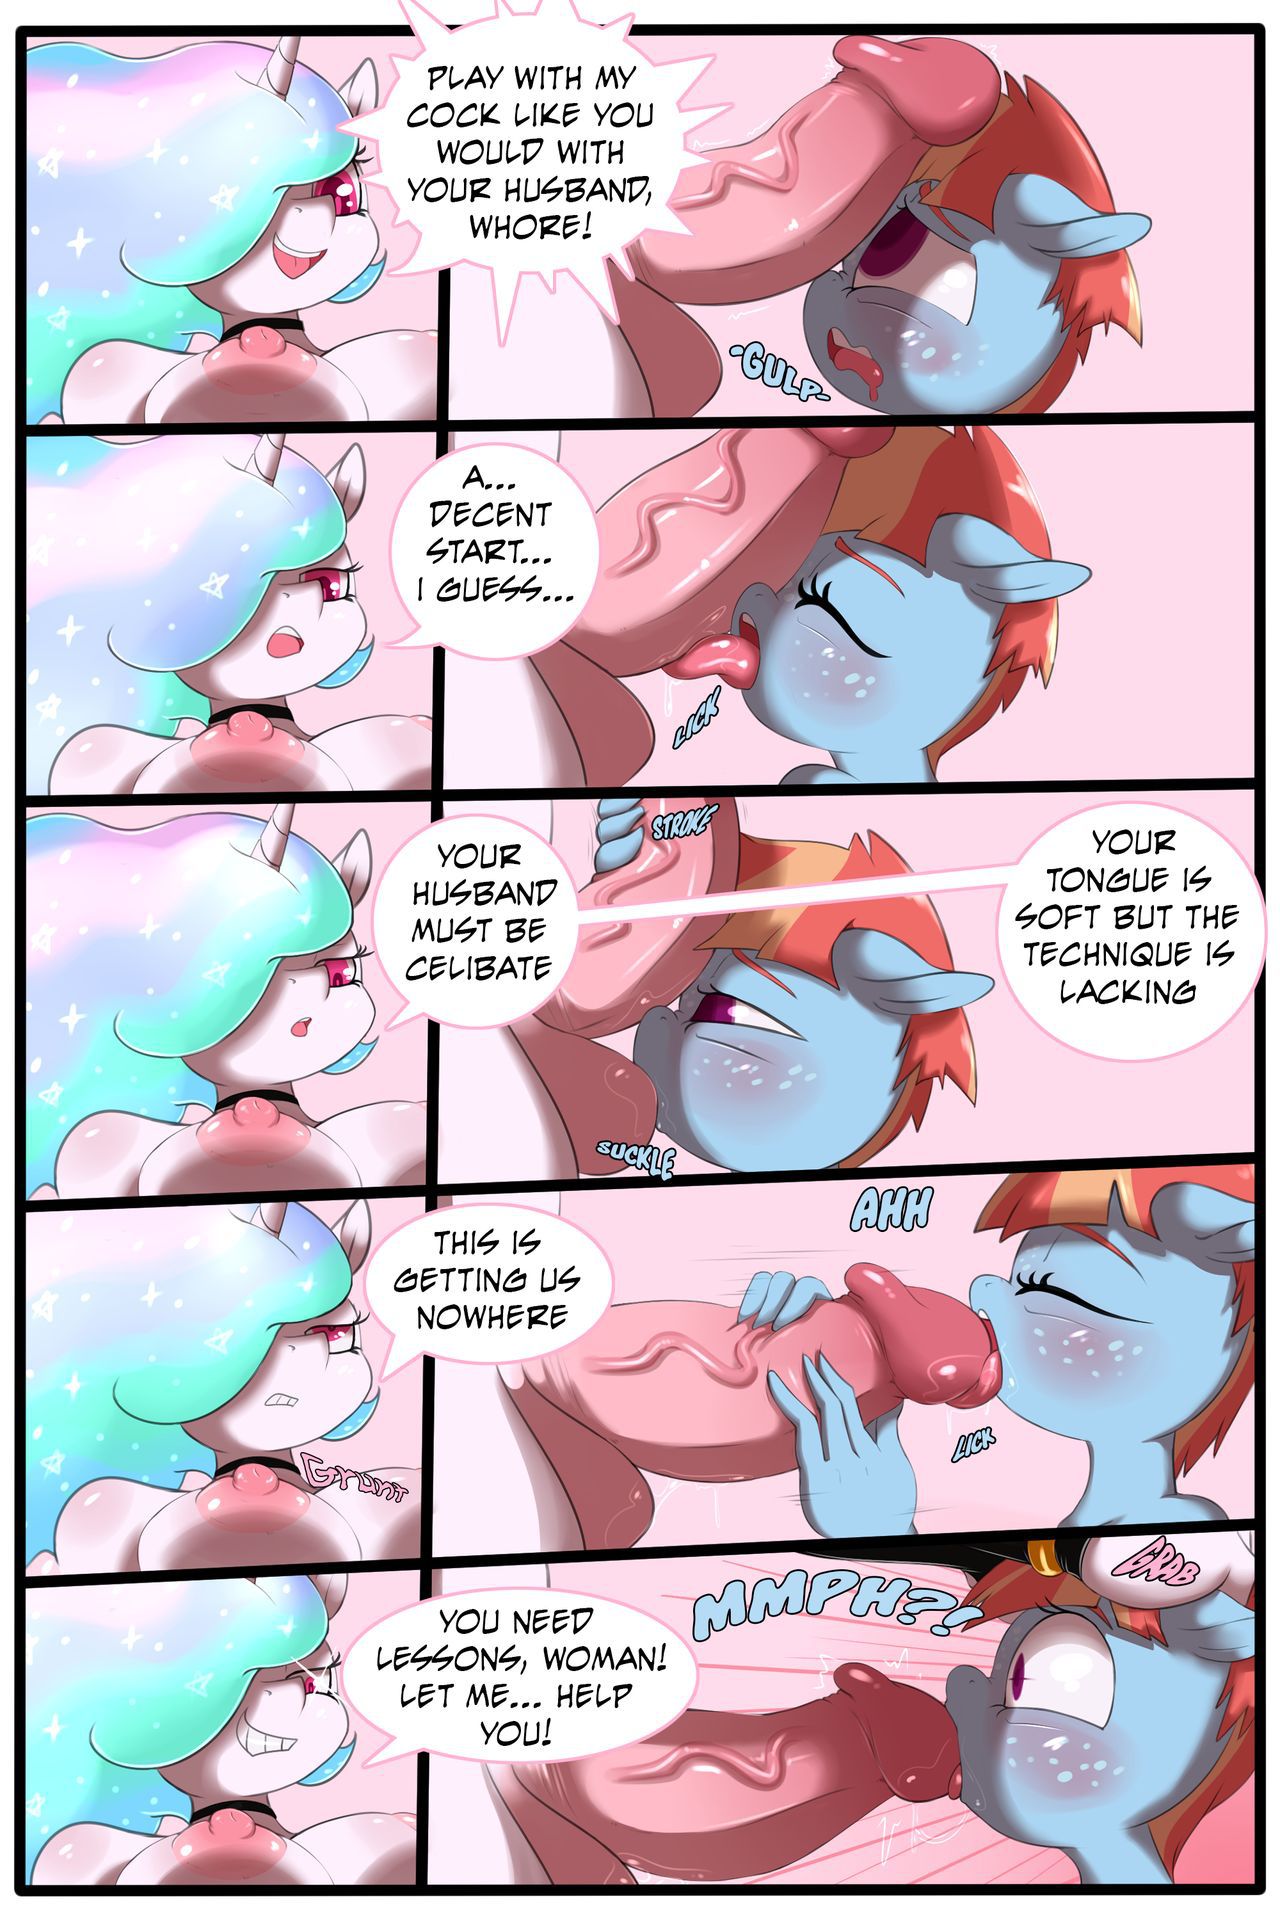 [Saurian] Do it for Her... 2 (My Little Pony: Friendship is Magic) (Ongoing) 4